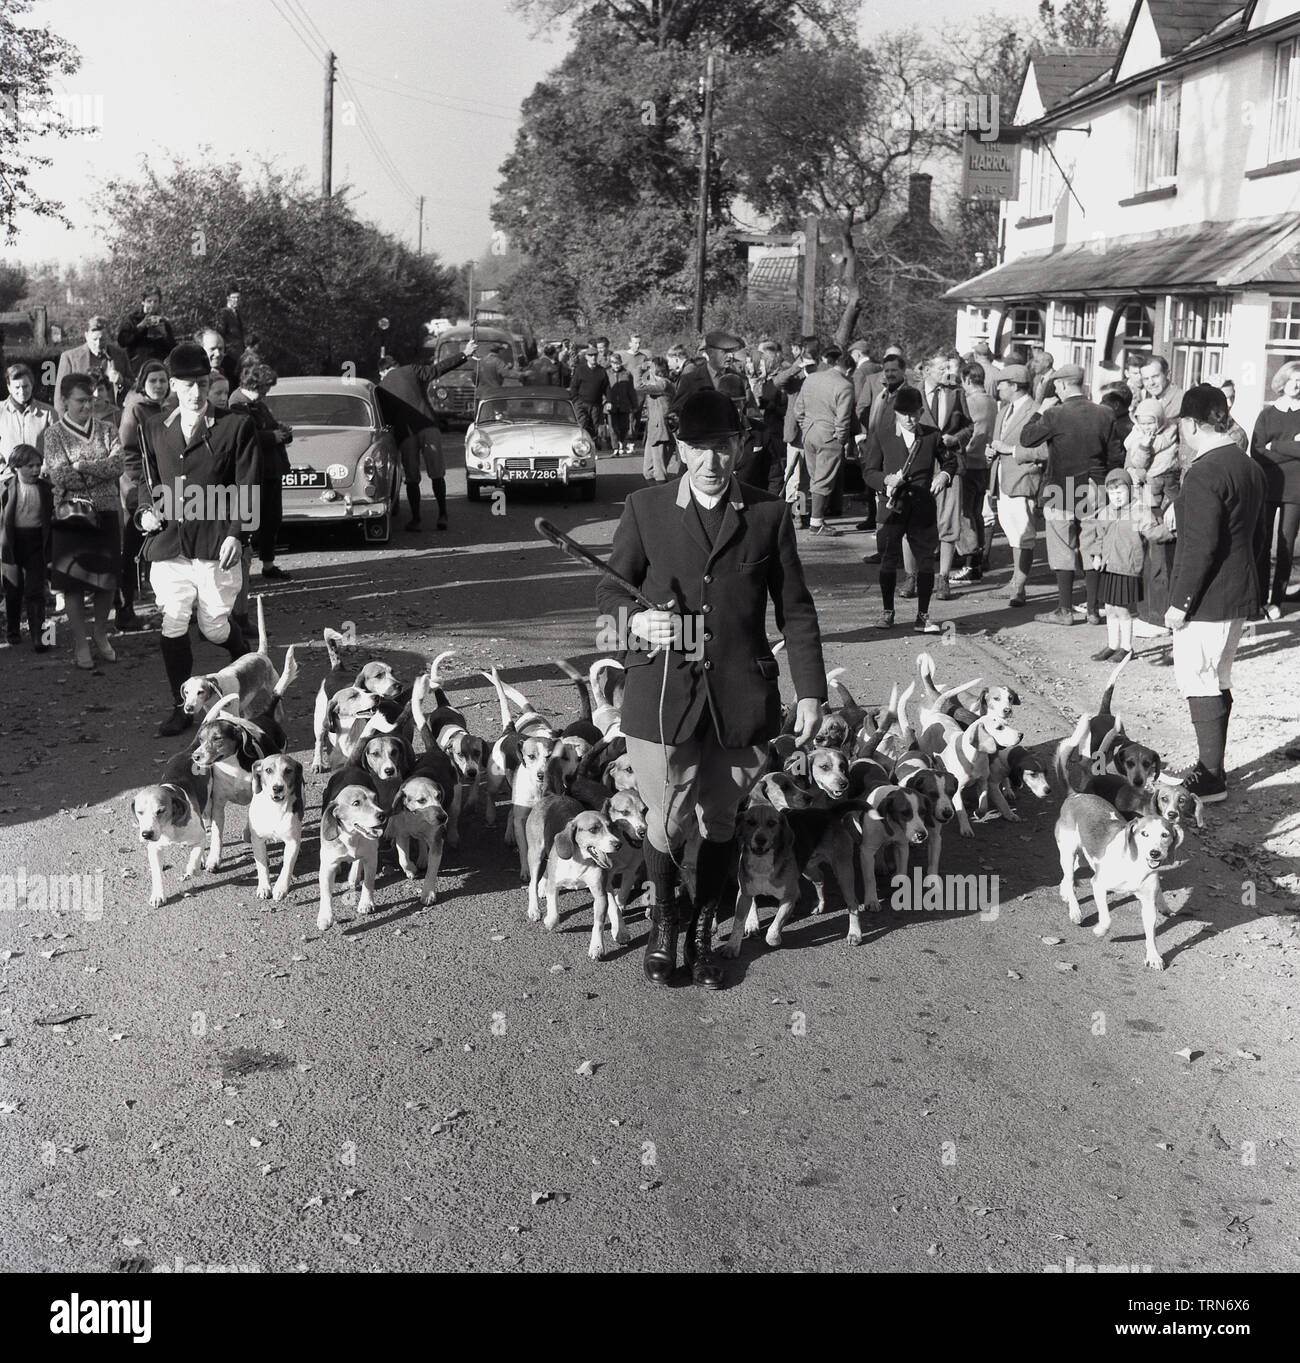 1965, historical, in rural england, local people gather outside the village pub, The Harrow, in Bishopstone, ready to follow the hunt, as the Master of Hounds sets off down the road with a pack of beagle dogs, Aylesbury, Buckinghamshire, England, UK. Owned at this time by the Aylesbury Brewery Company (ABC) The Harrow pub closed down in 2014, the fate of many British village pubs. Stock Photo